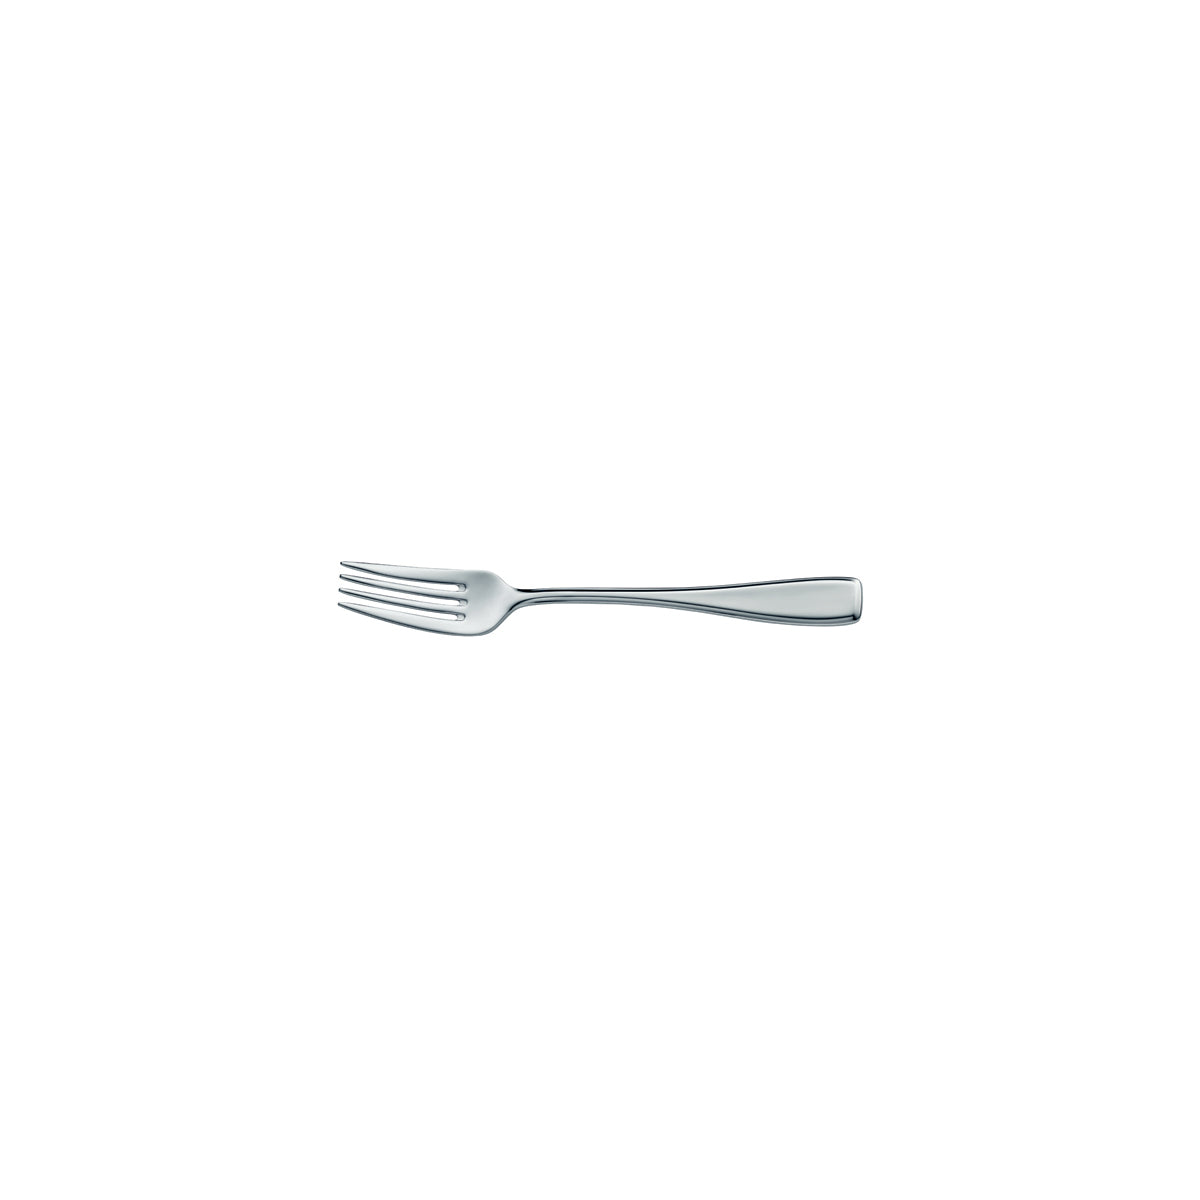 10.7964.6060 WMF Solid Cake Fork Silverplated Tomkin Australia Hospitality Supplies